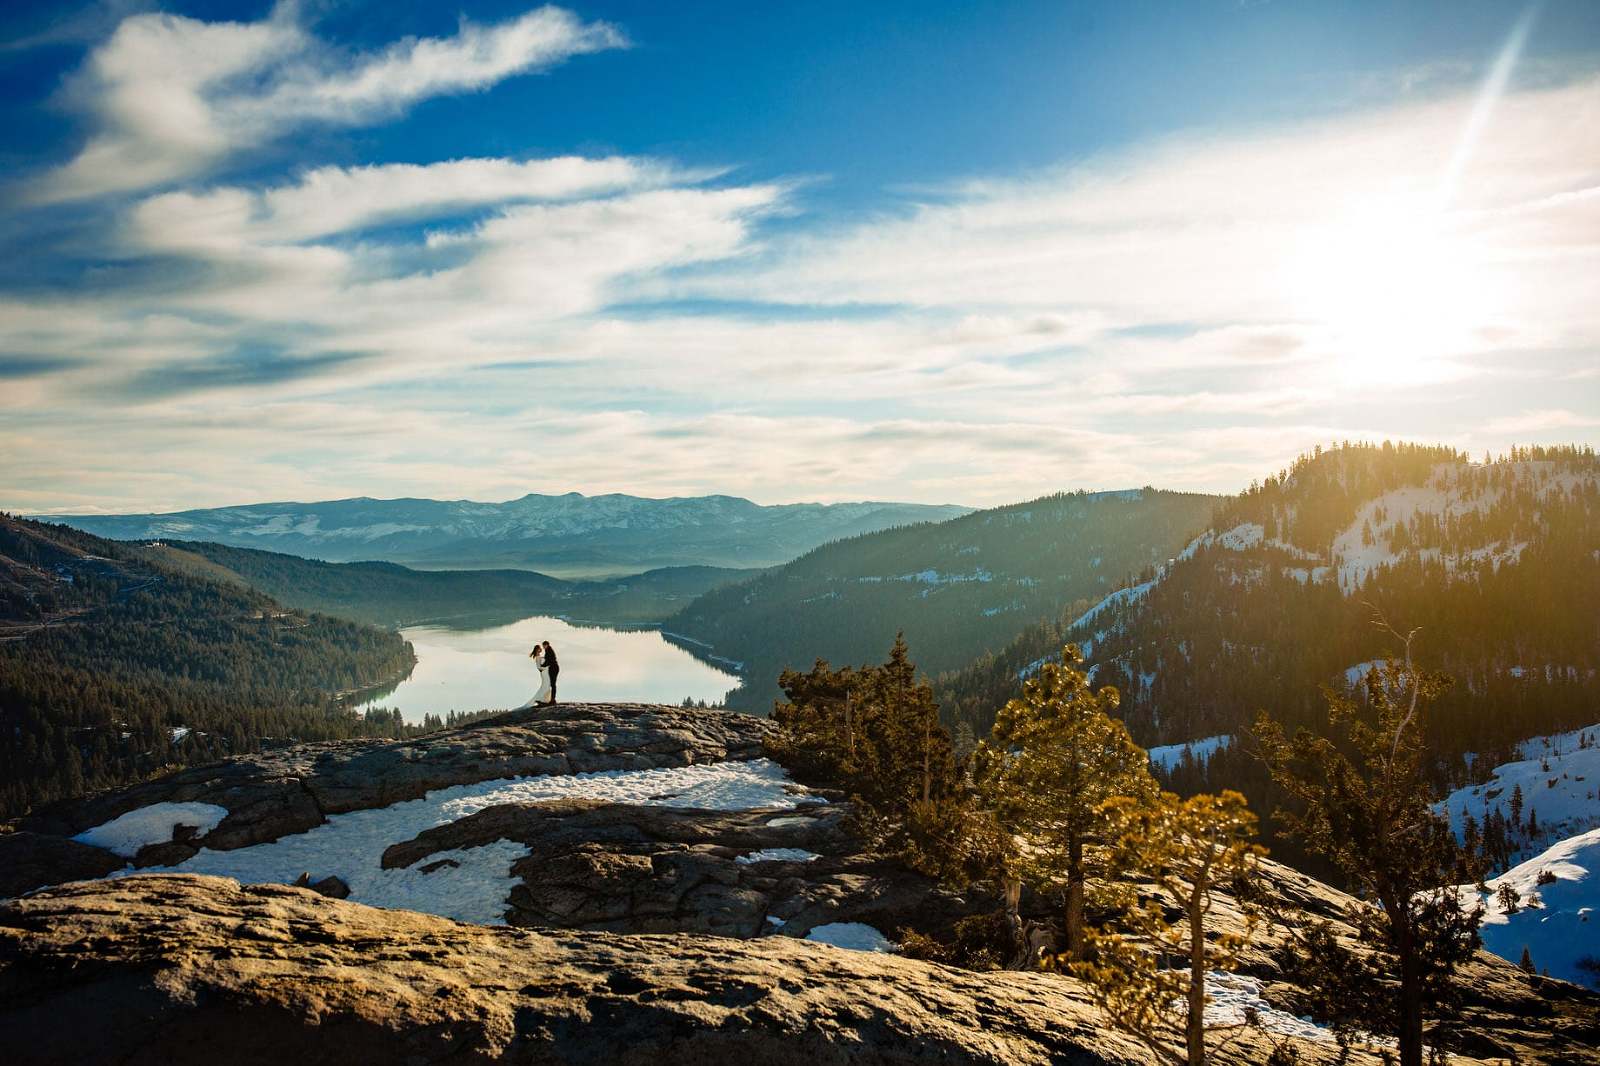 Lake Tahoe elopement photographers are in higher demand as small weddings are increasingly popular around the lake.